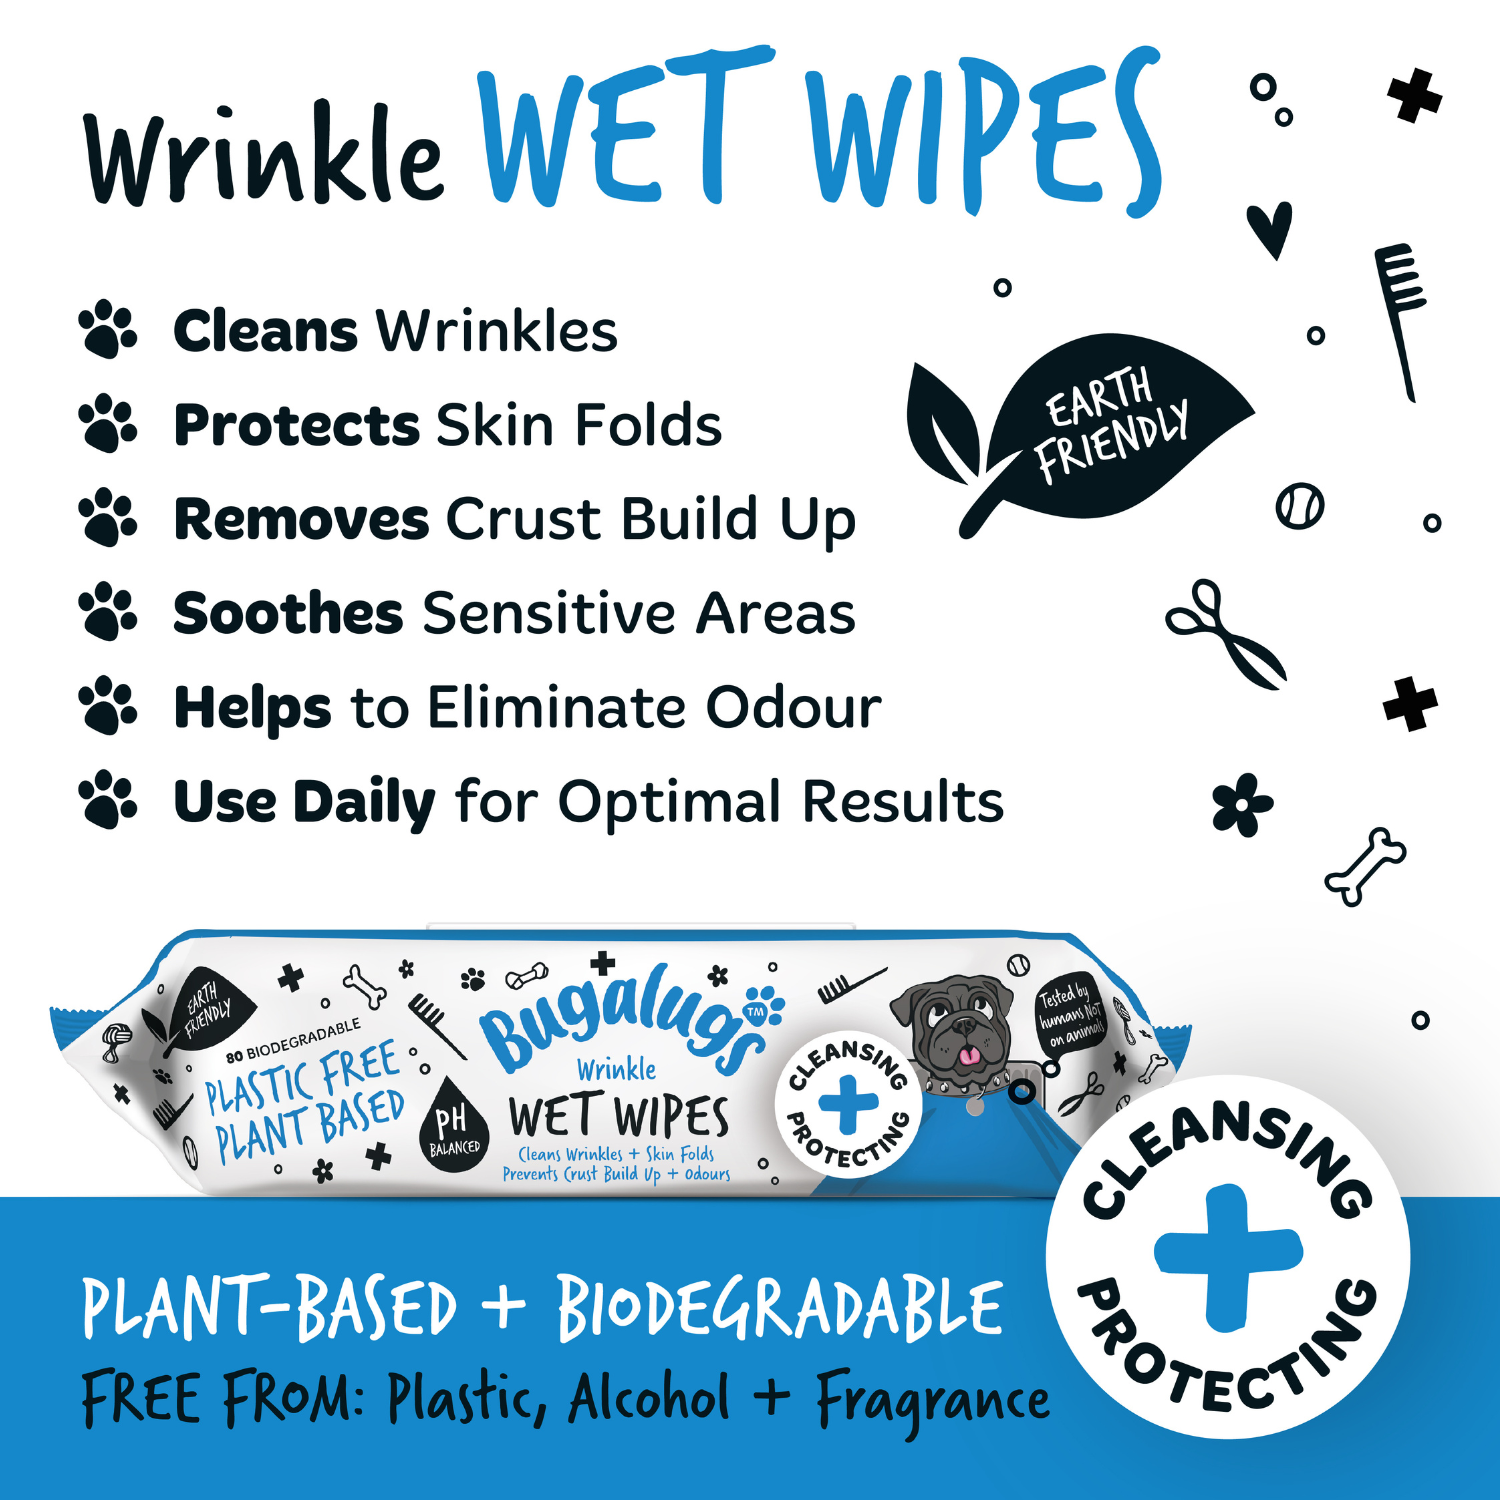 Bugalugs Wrinkle Wet Wipes for Dogs and Cats - Plant-based, biodegradable, free from plastic, alcohol and fragrance